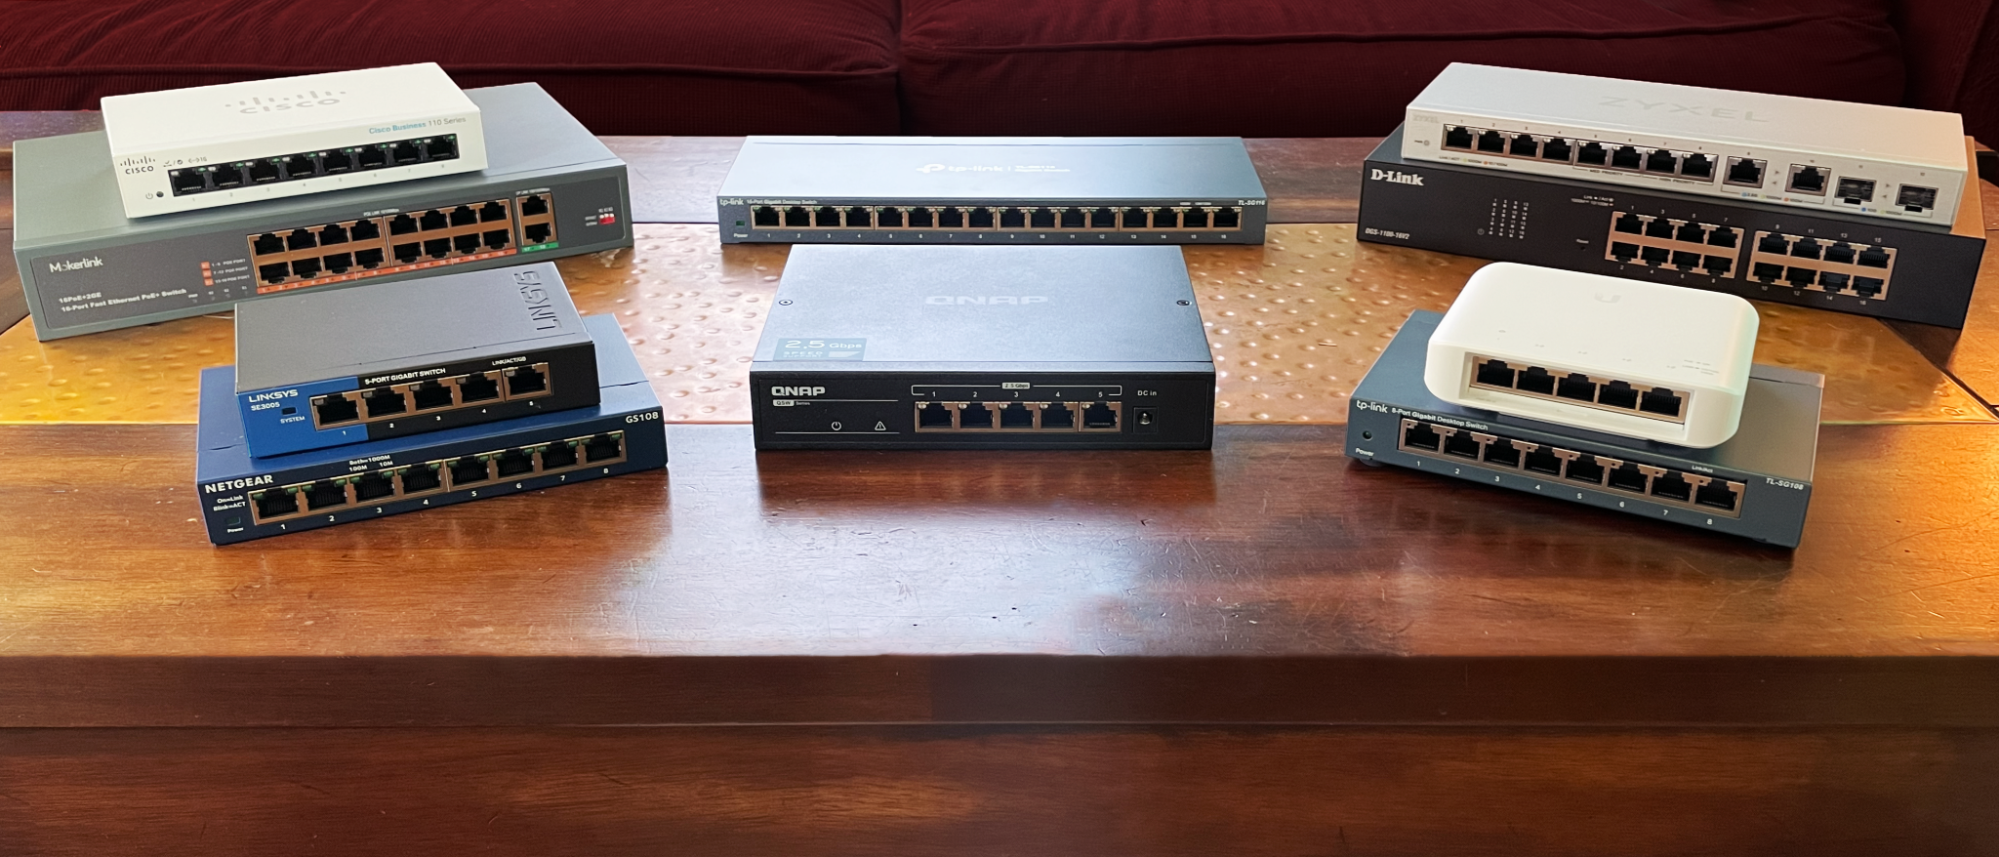 New 5-Port PoE+ Gigabit Ethernet Unmanaged Switch perfect for Small and  Home Offices 